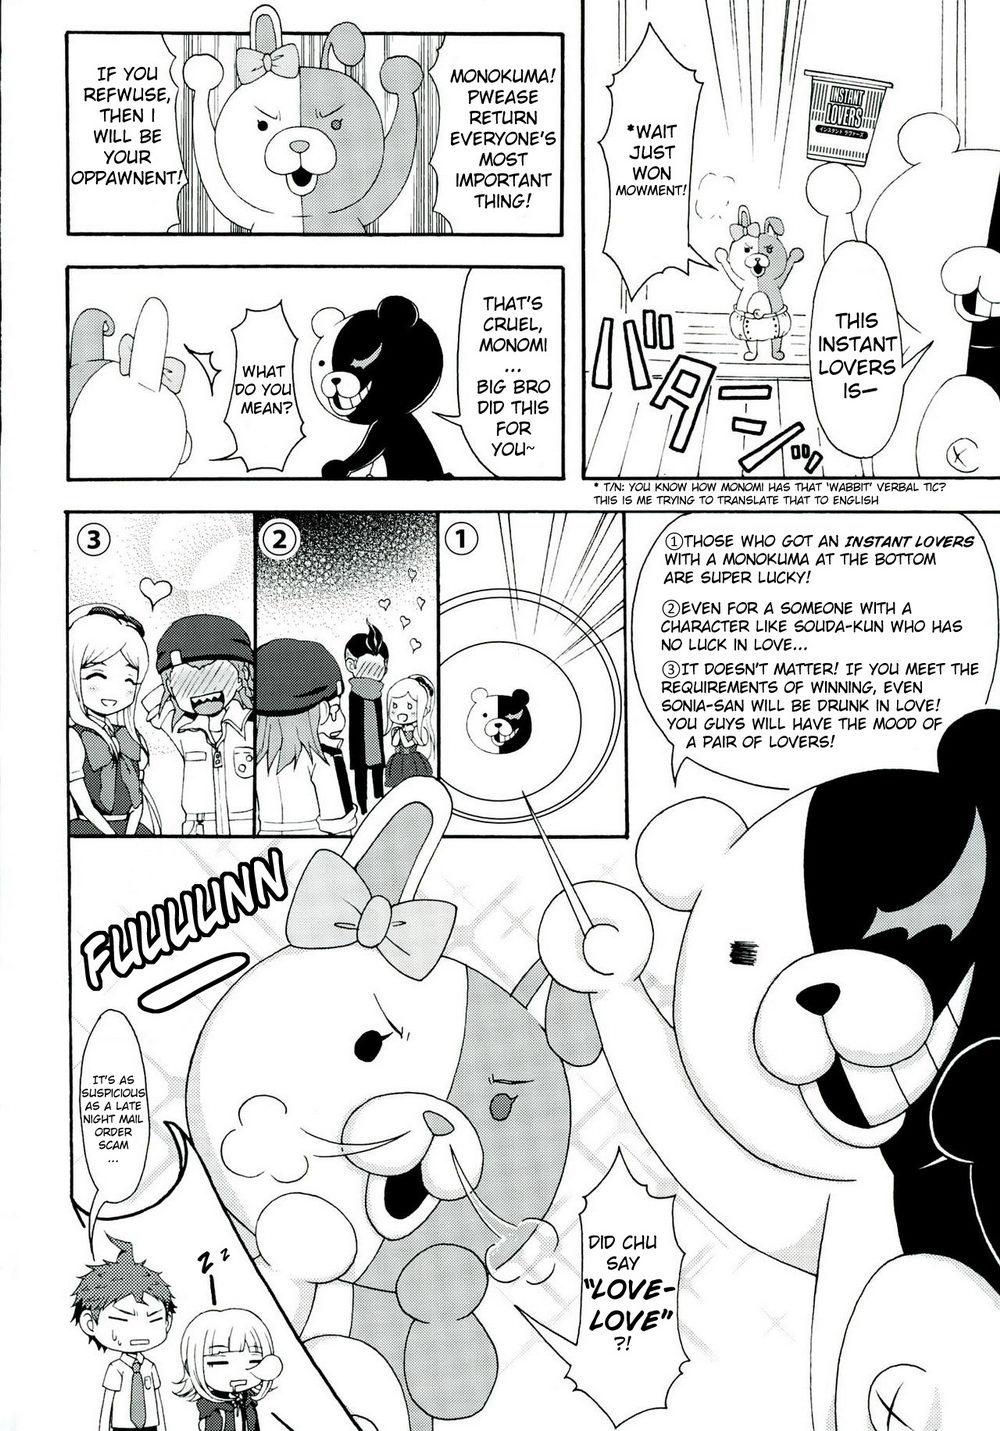 Free Fuck INSTANT LOVERS - Danganronpa Baile - Page 10